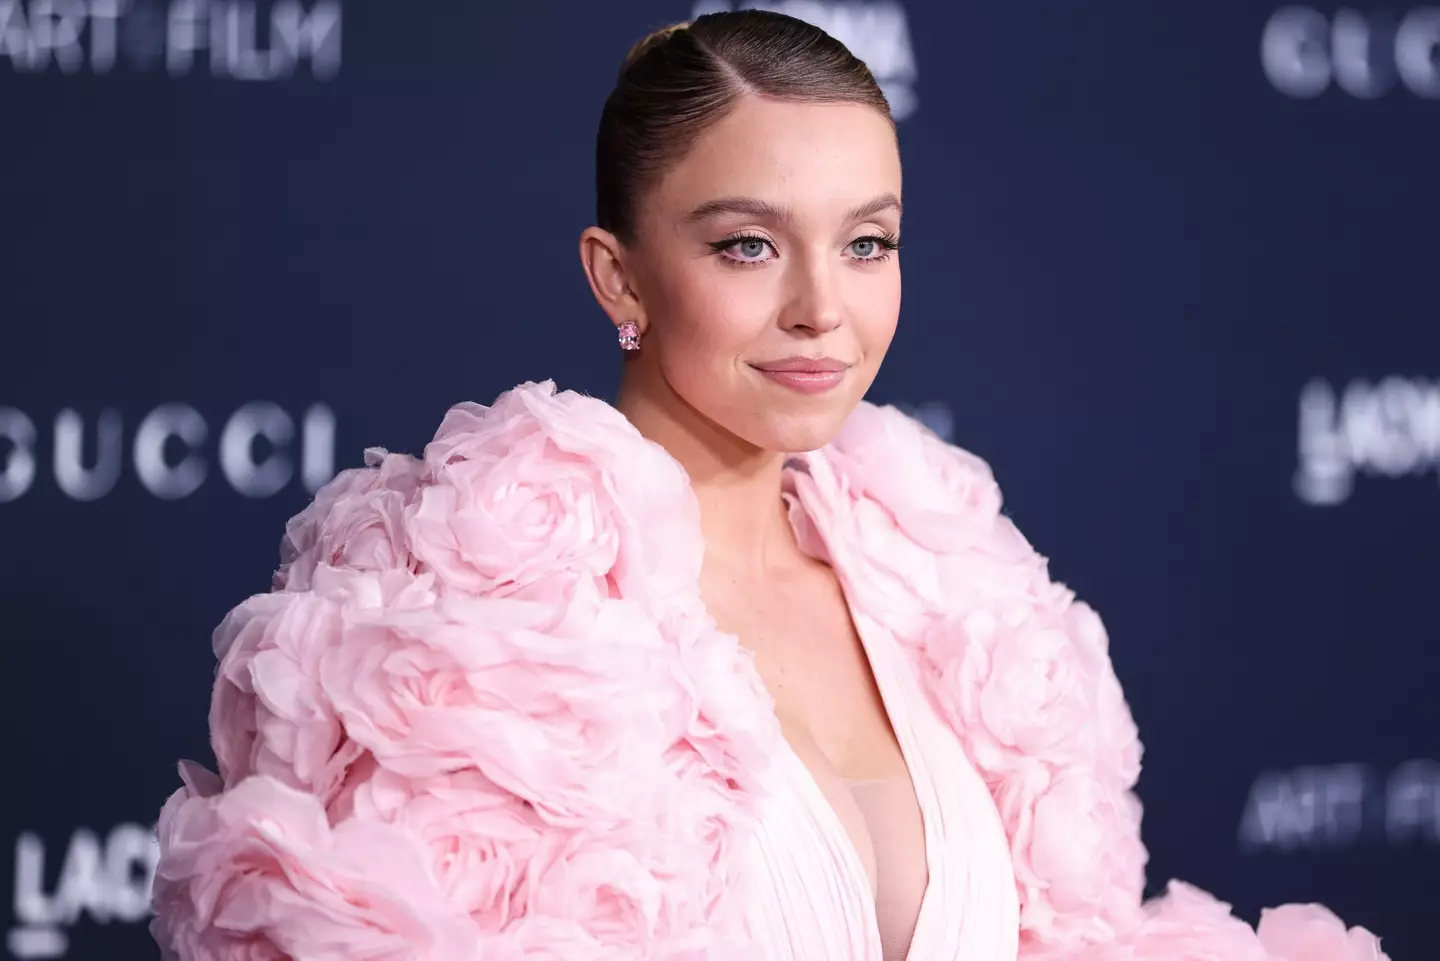 Sydney Sweeney made the list for the first time.